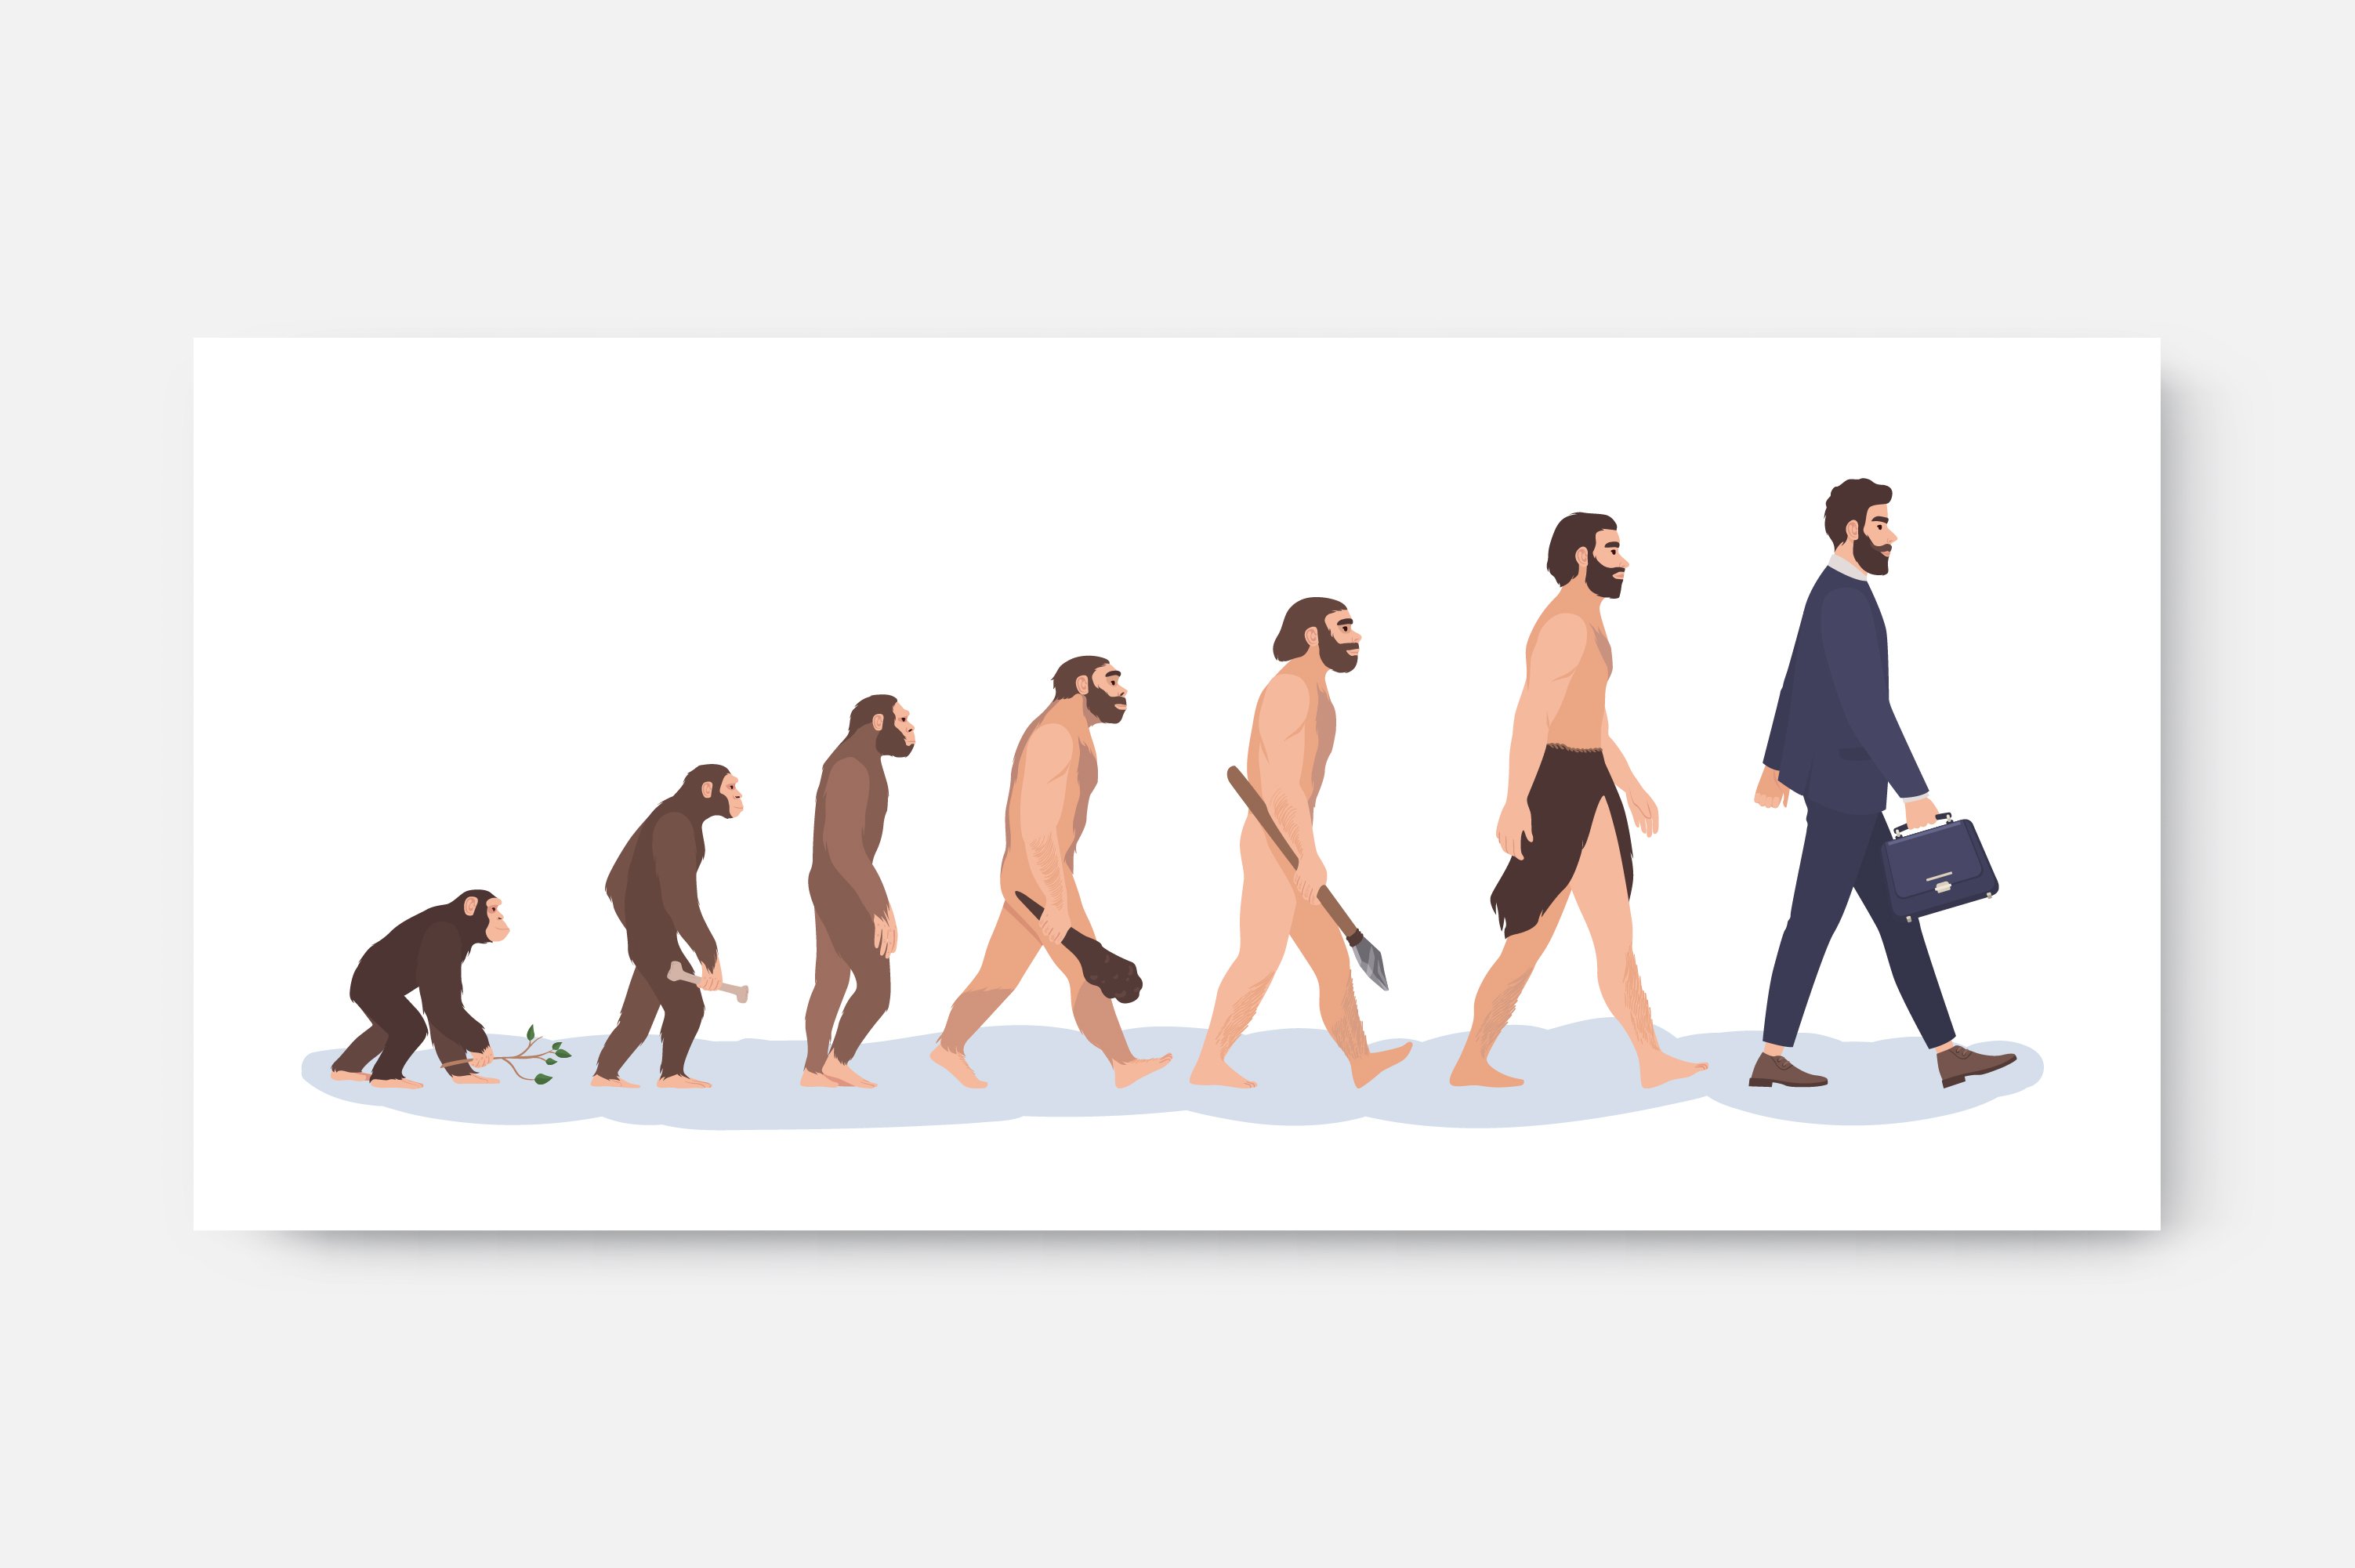 The evolution of humans, from apes to our current stage.